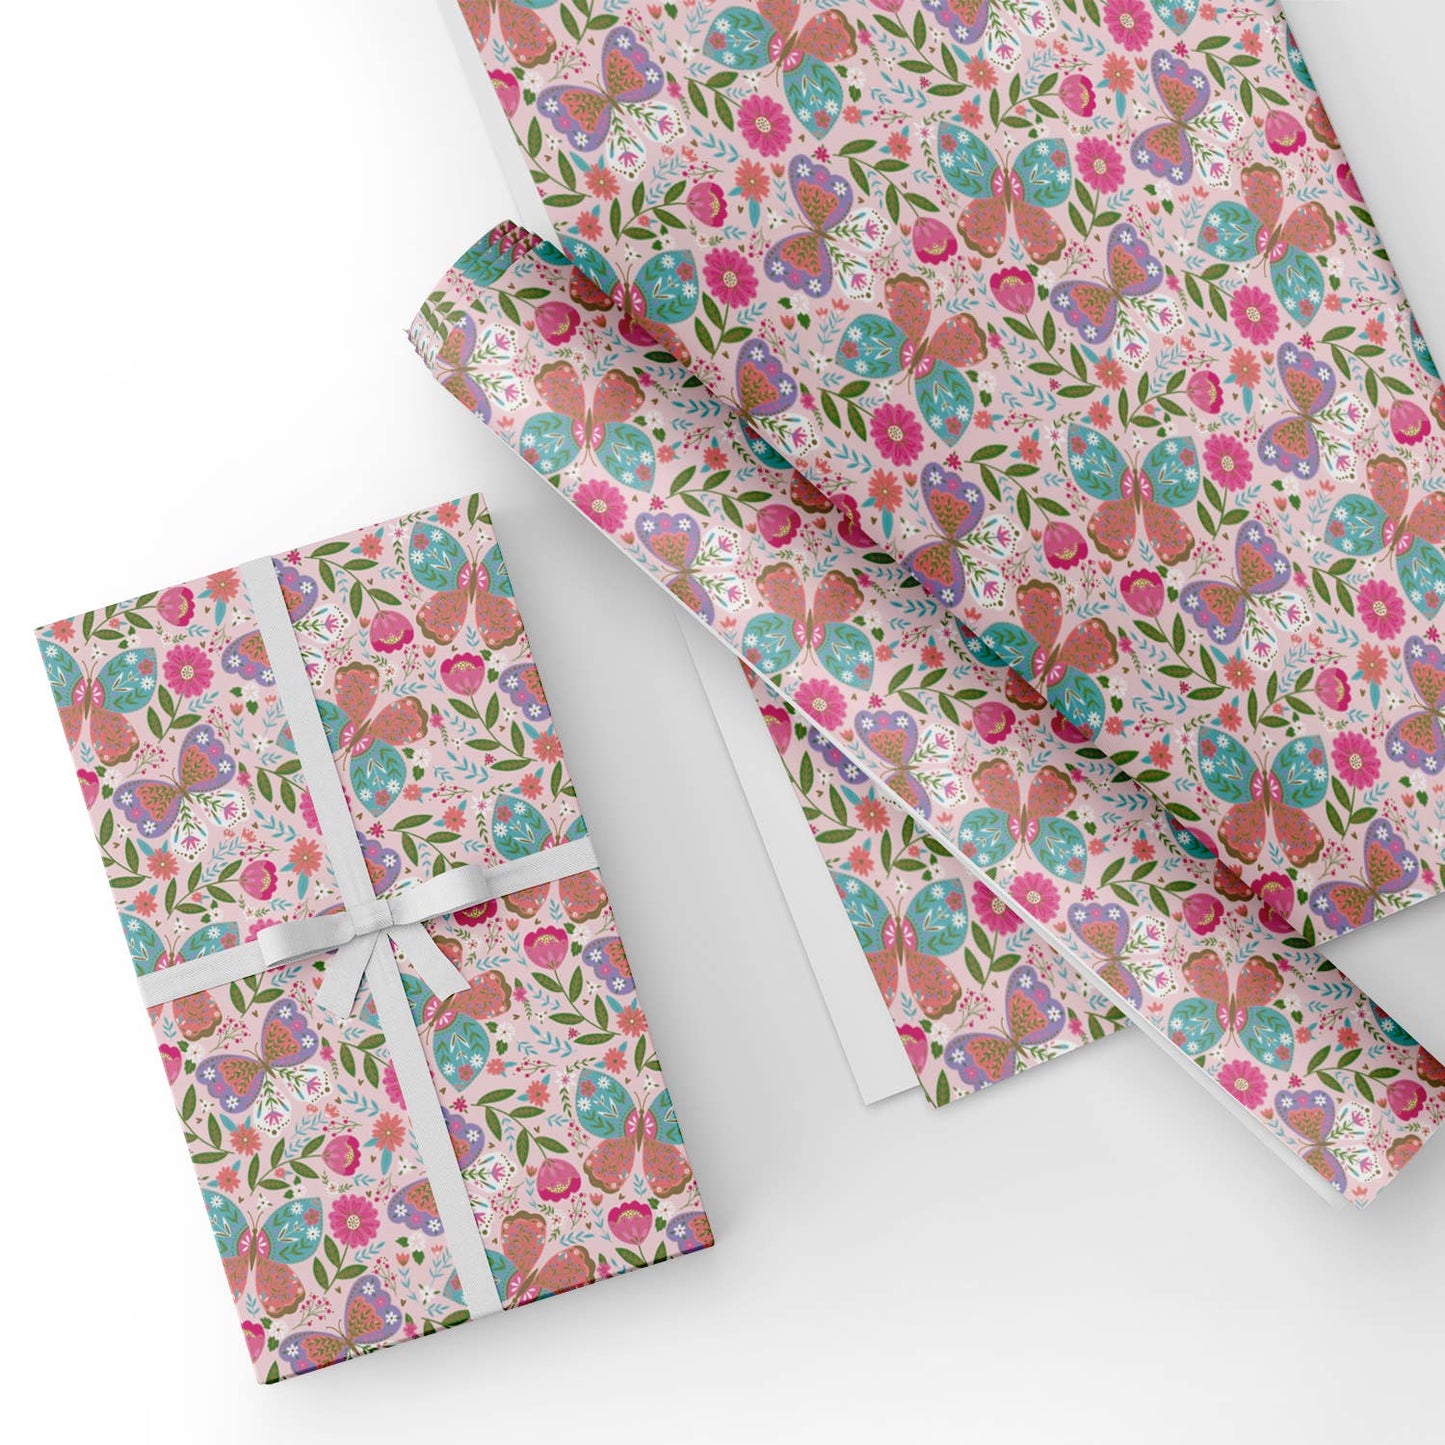 Colored Butterfly Flat Wrapping Paper Sheet Wholesale Wraphaholic